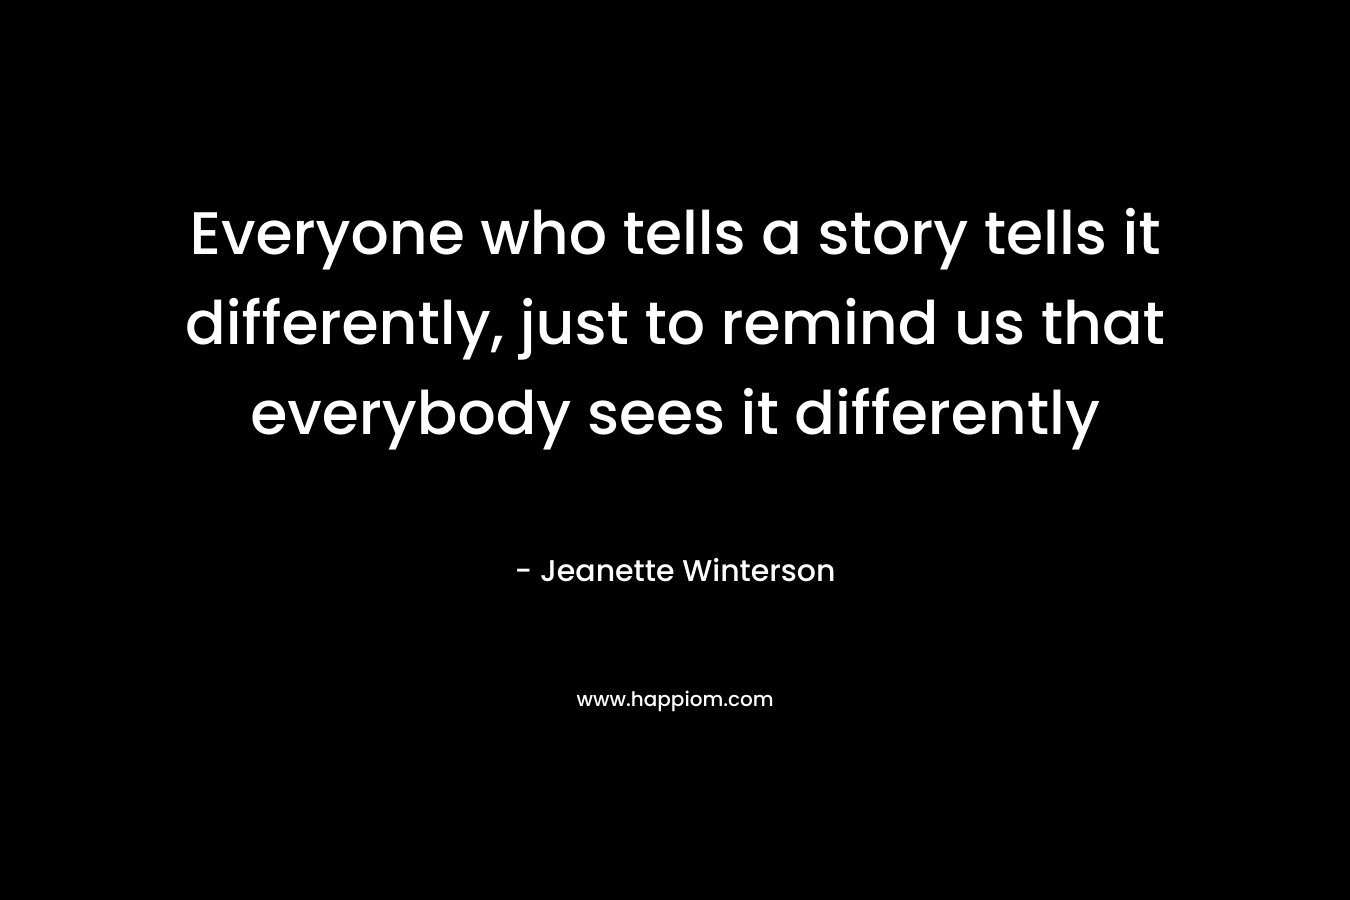 Everyone who tells a story tells it differently, just to remind us that everybody sees it differently